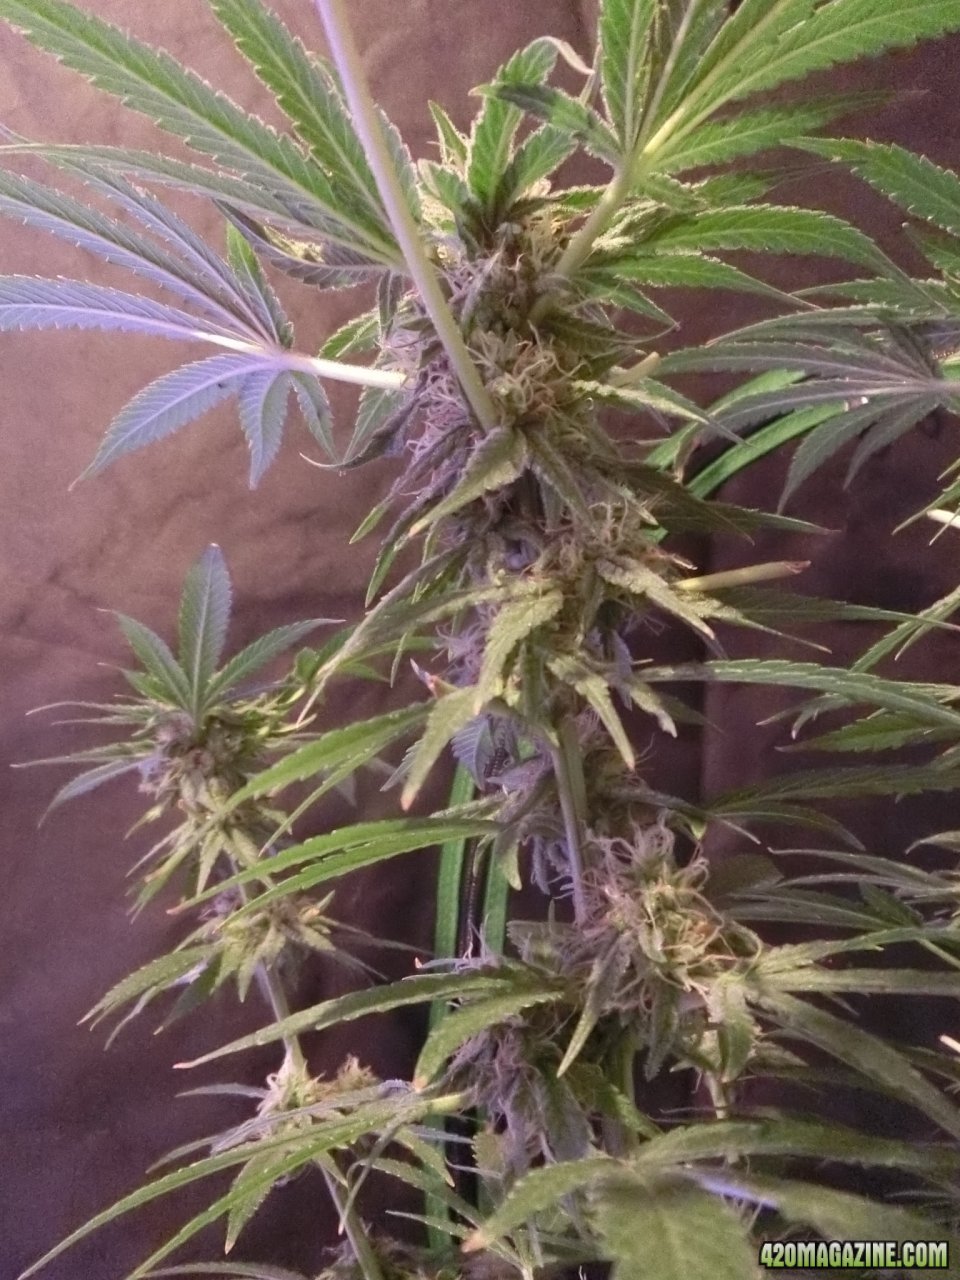 Day 98 Double Black Flo Day 52 - Stem View